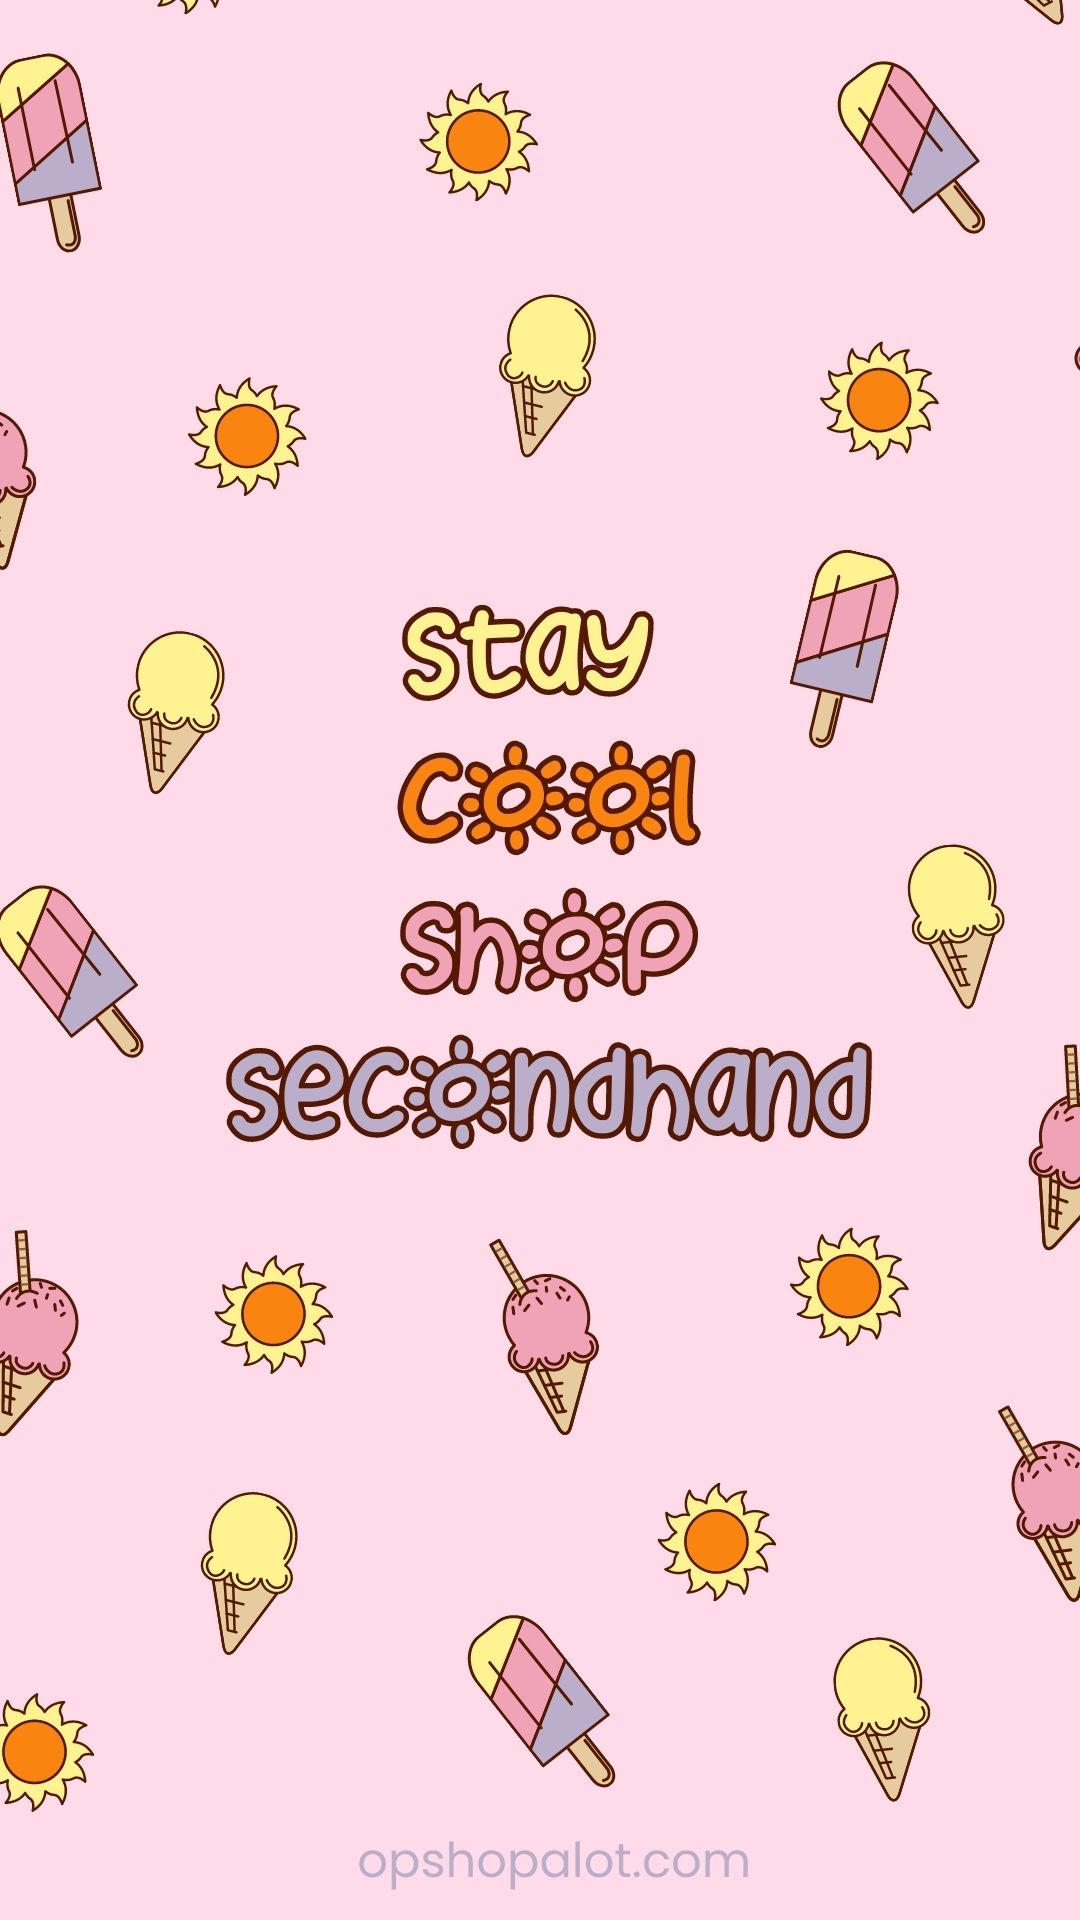 Poster with pink background, suns and icecreams as a background with the text stay cool shop secondhand.